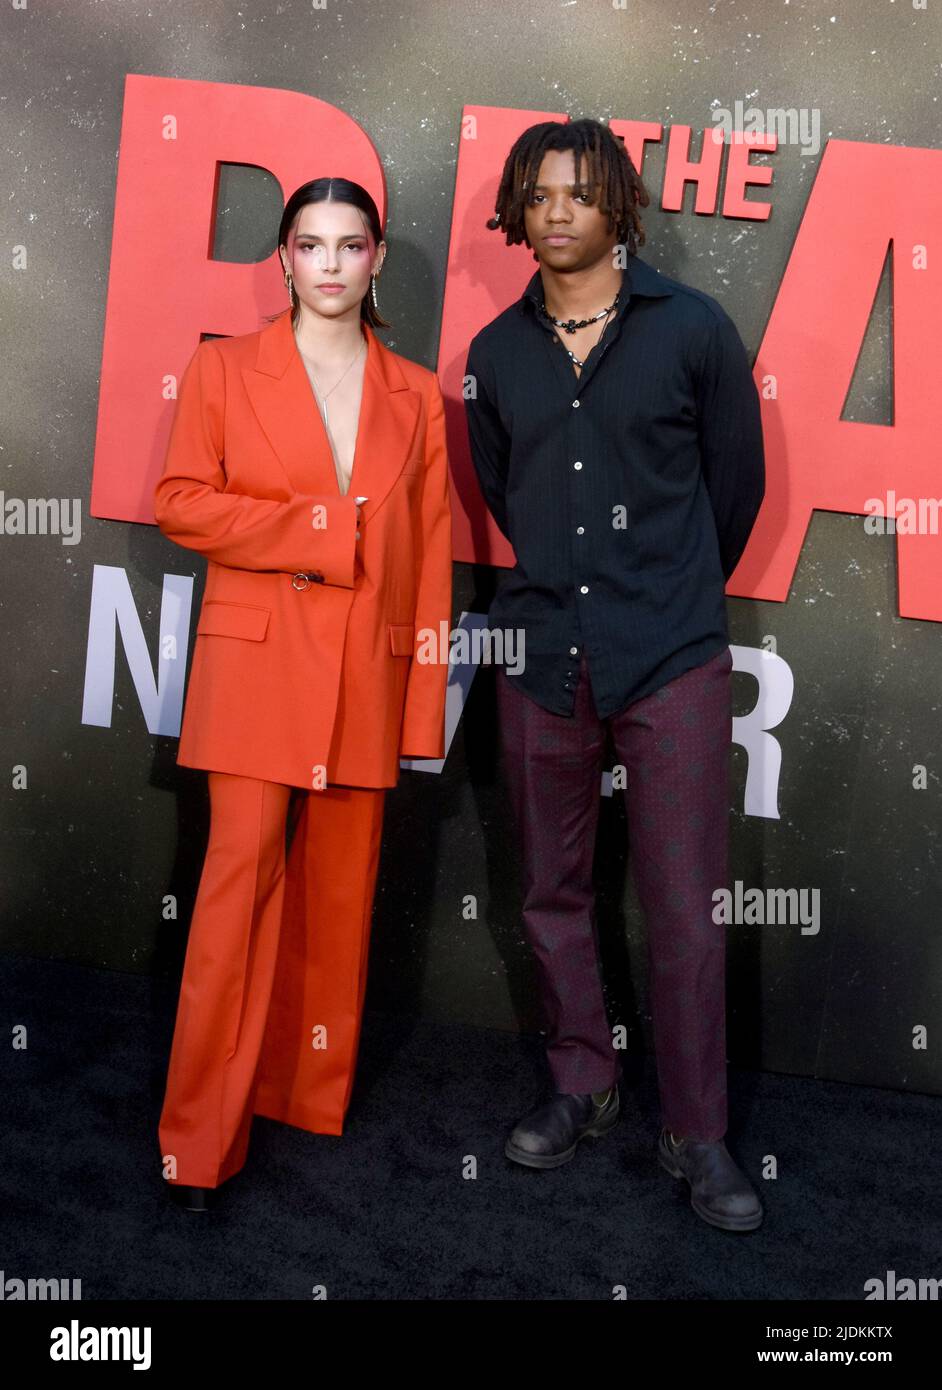 Hollywood, California, USA 21st June 2022 Actress Indie Navarrette and actor Henry Hunter Hall attend Universal Pictures 'The Black Phone' Premiere at TCL Chinese Theatre on June 21, 2022 in Hollywood, California, USA. Photo by Barry King/Alamy Live News Stock Photo